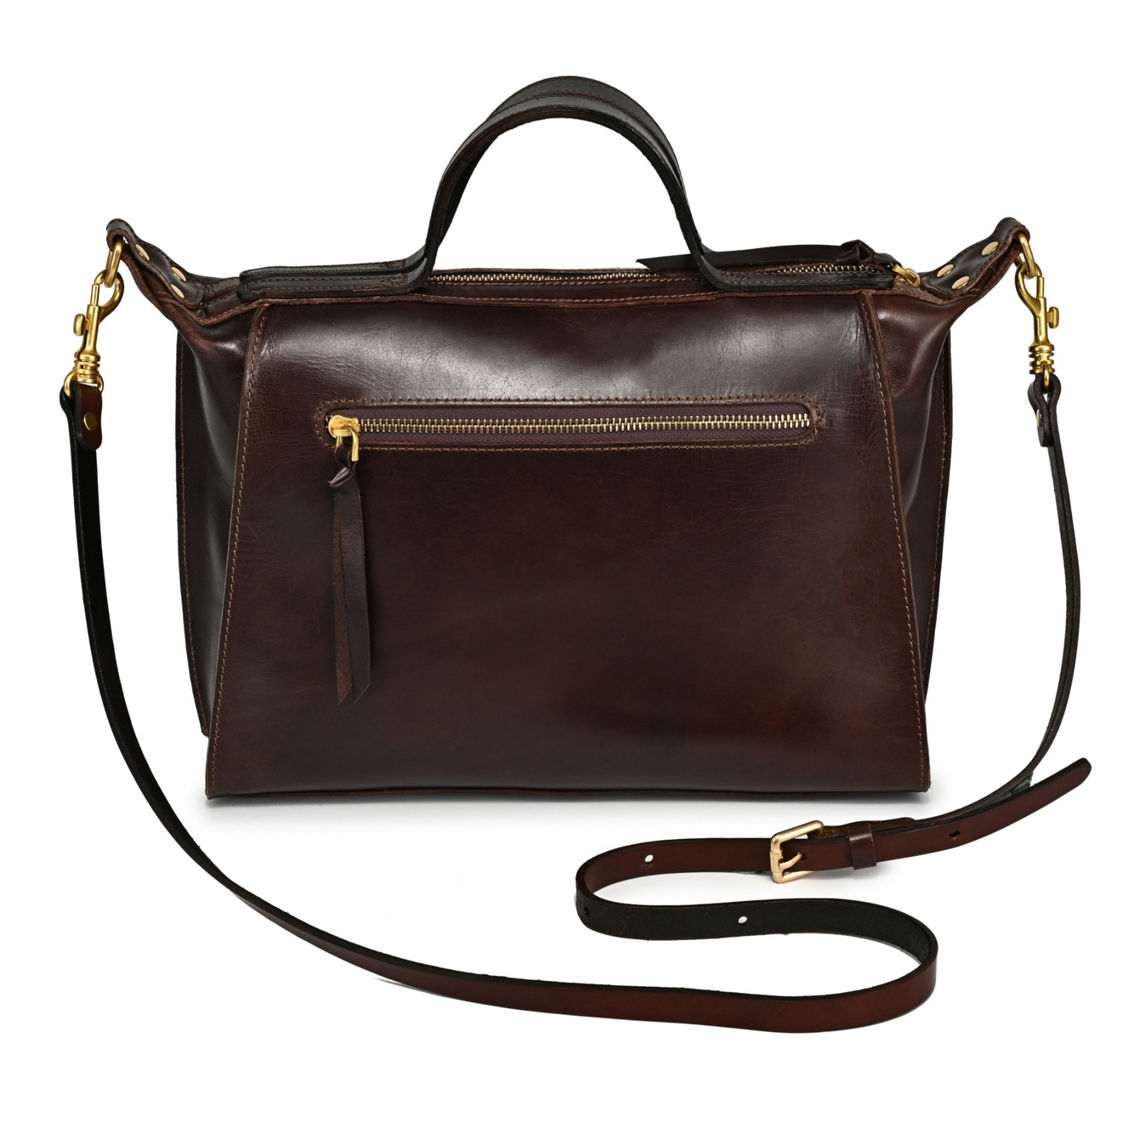 Old Trend Gypsy Soul Leather Satchel - Image 5 of 5